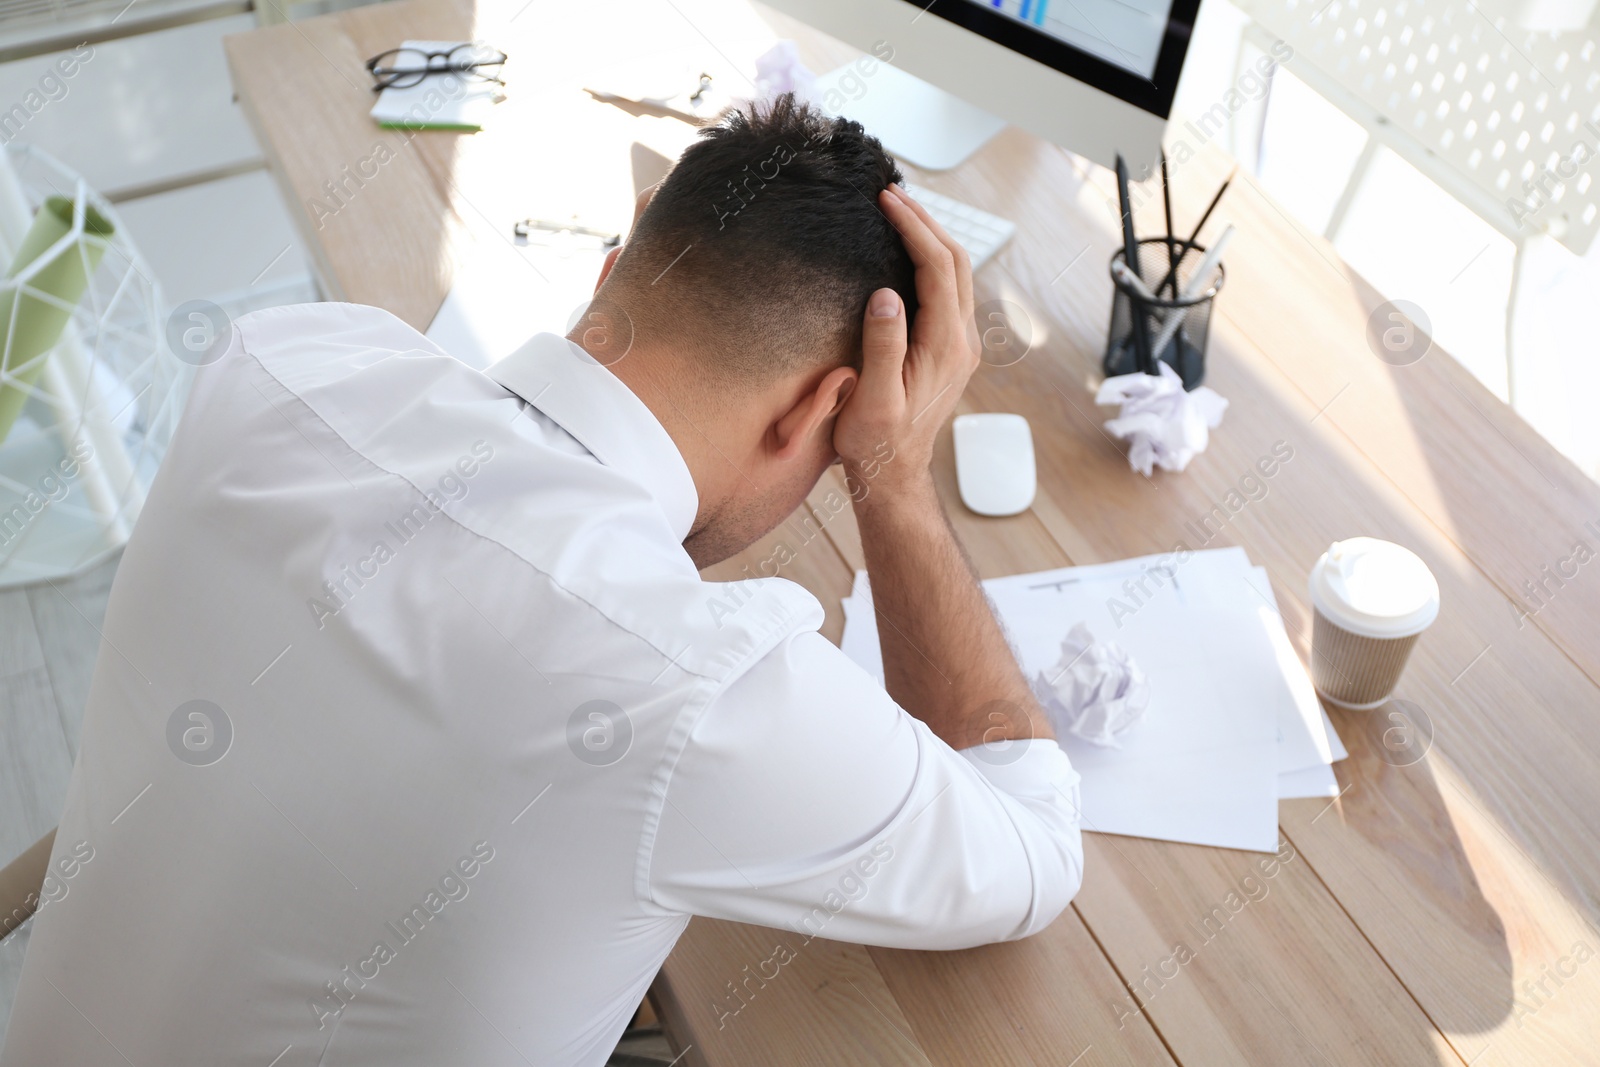 Photo of Businessman stressing out at workplace in office, above view